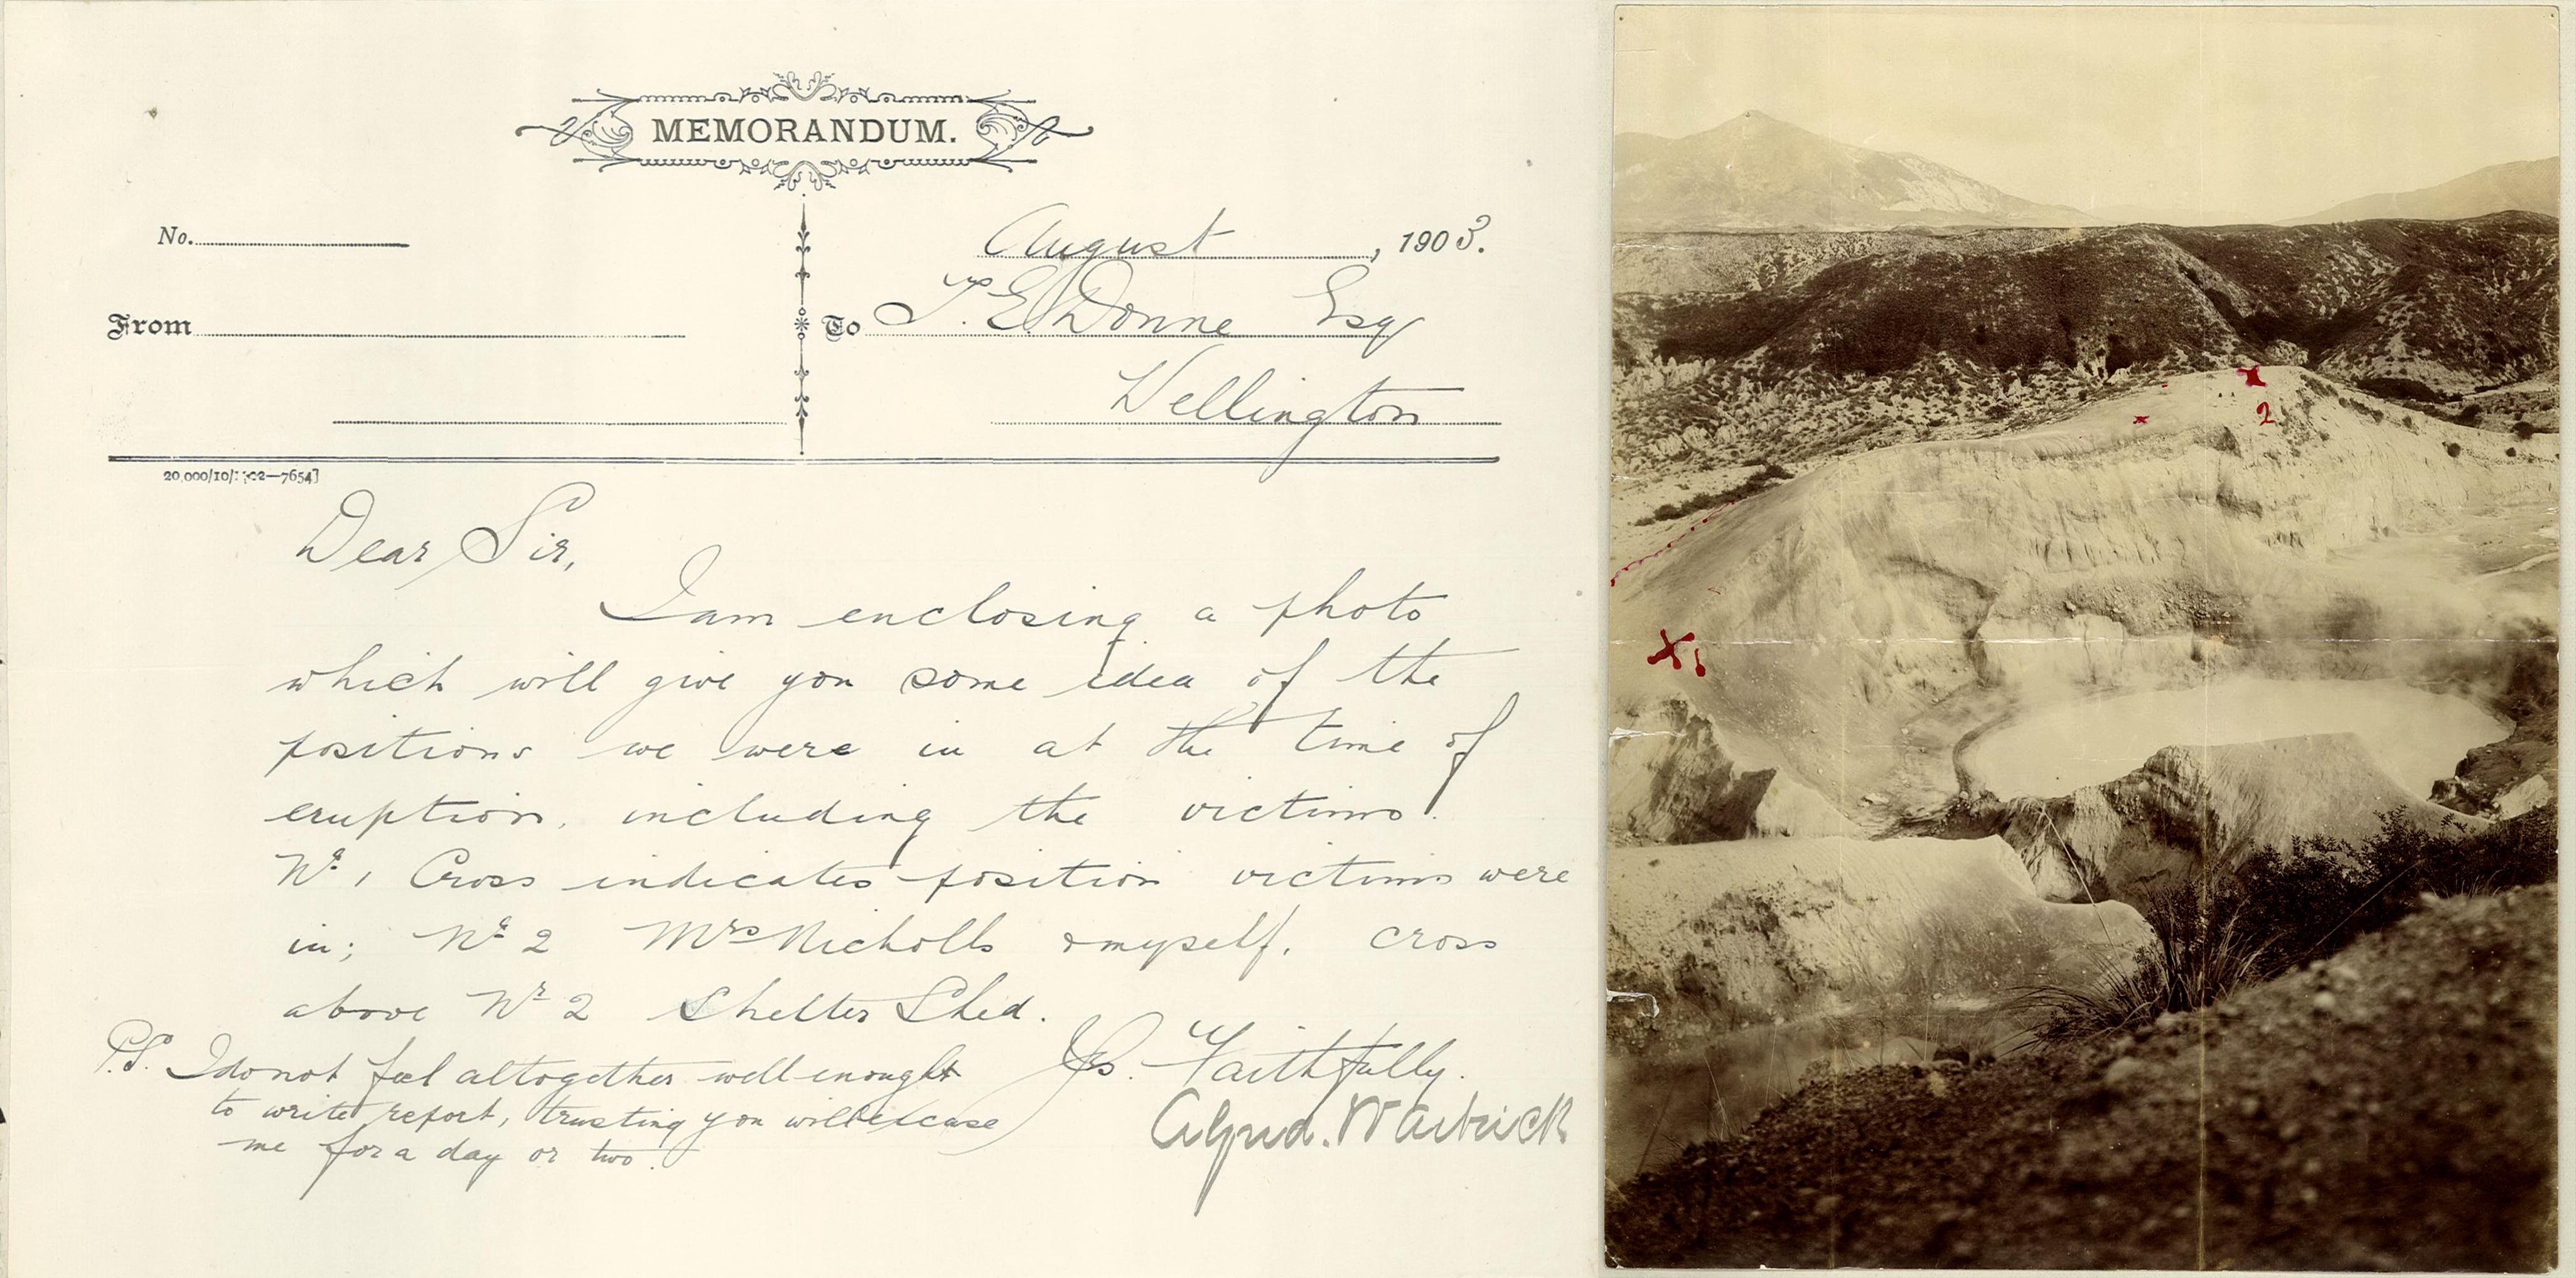 Memo and photograph from the Waimangu disaster of 1903, showing where the deceased were standing in relation to the geyser